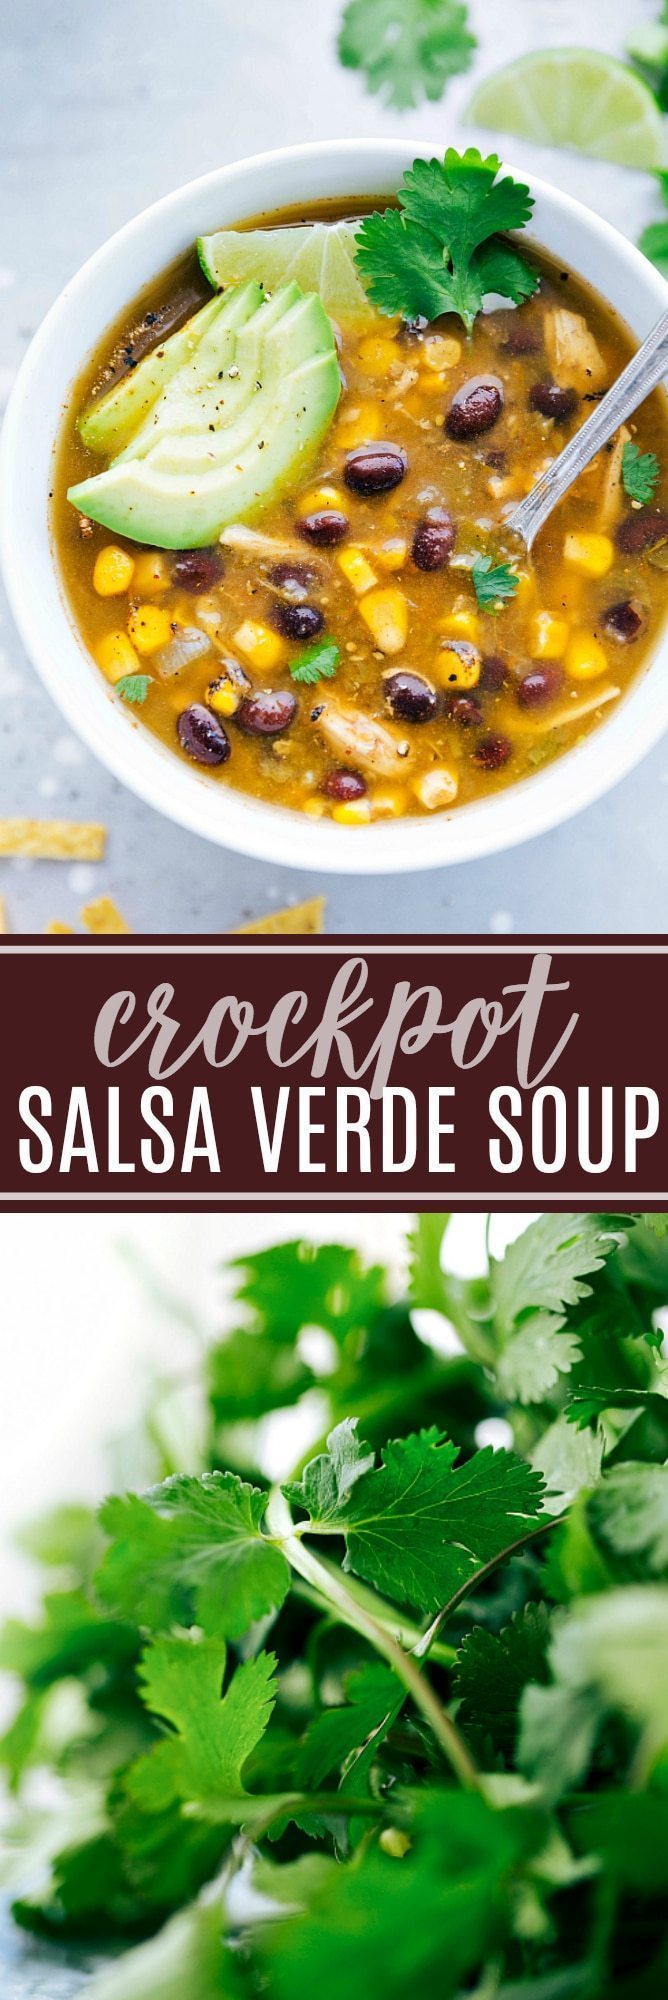 This healthy crockpot salsa verde chicken soup is mega flavorful and takes less than 10 minutes prep! | chelseasmessyapron.com